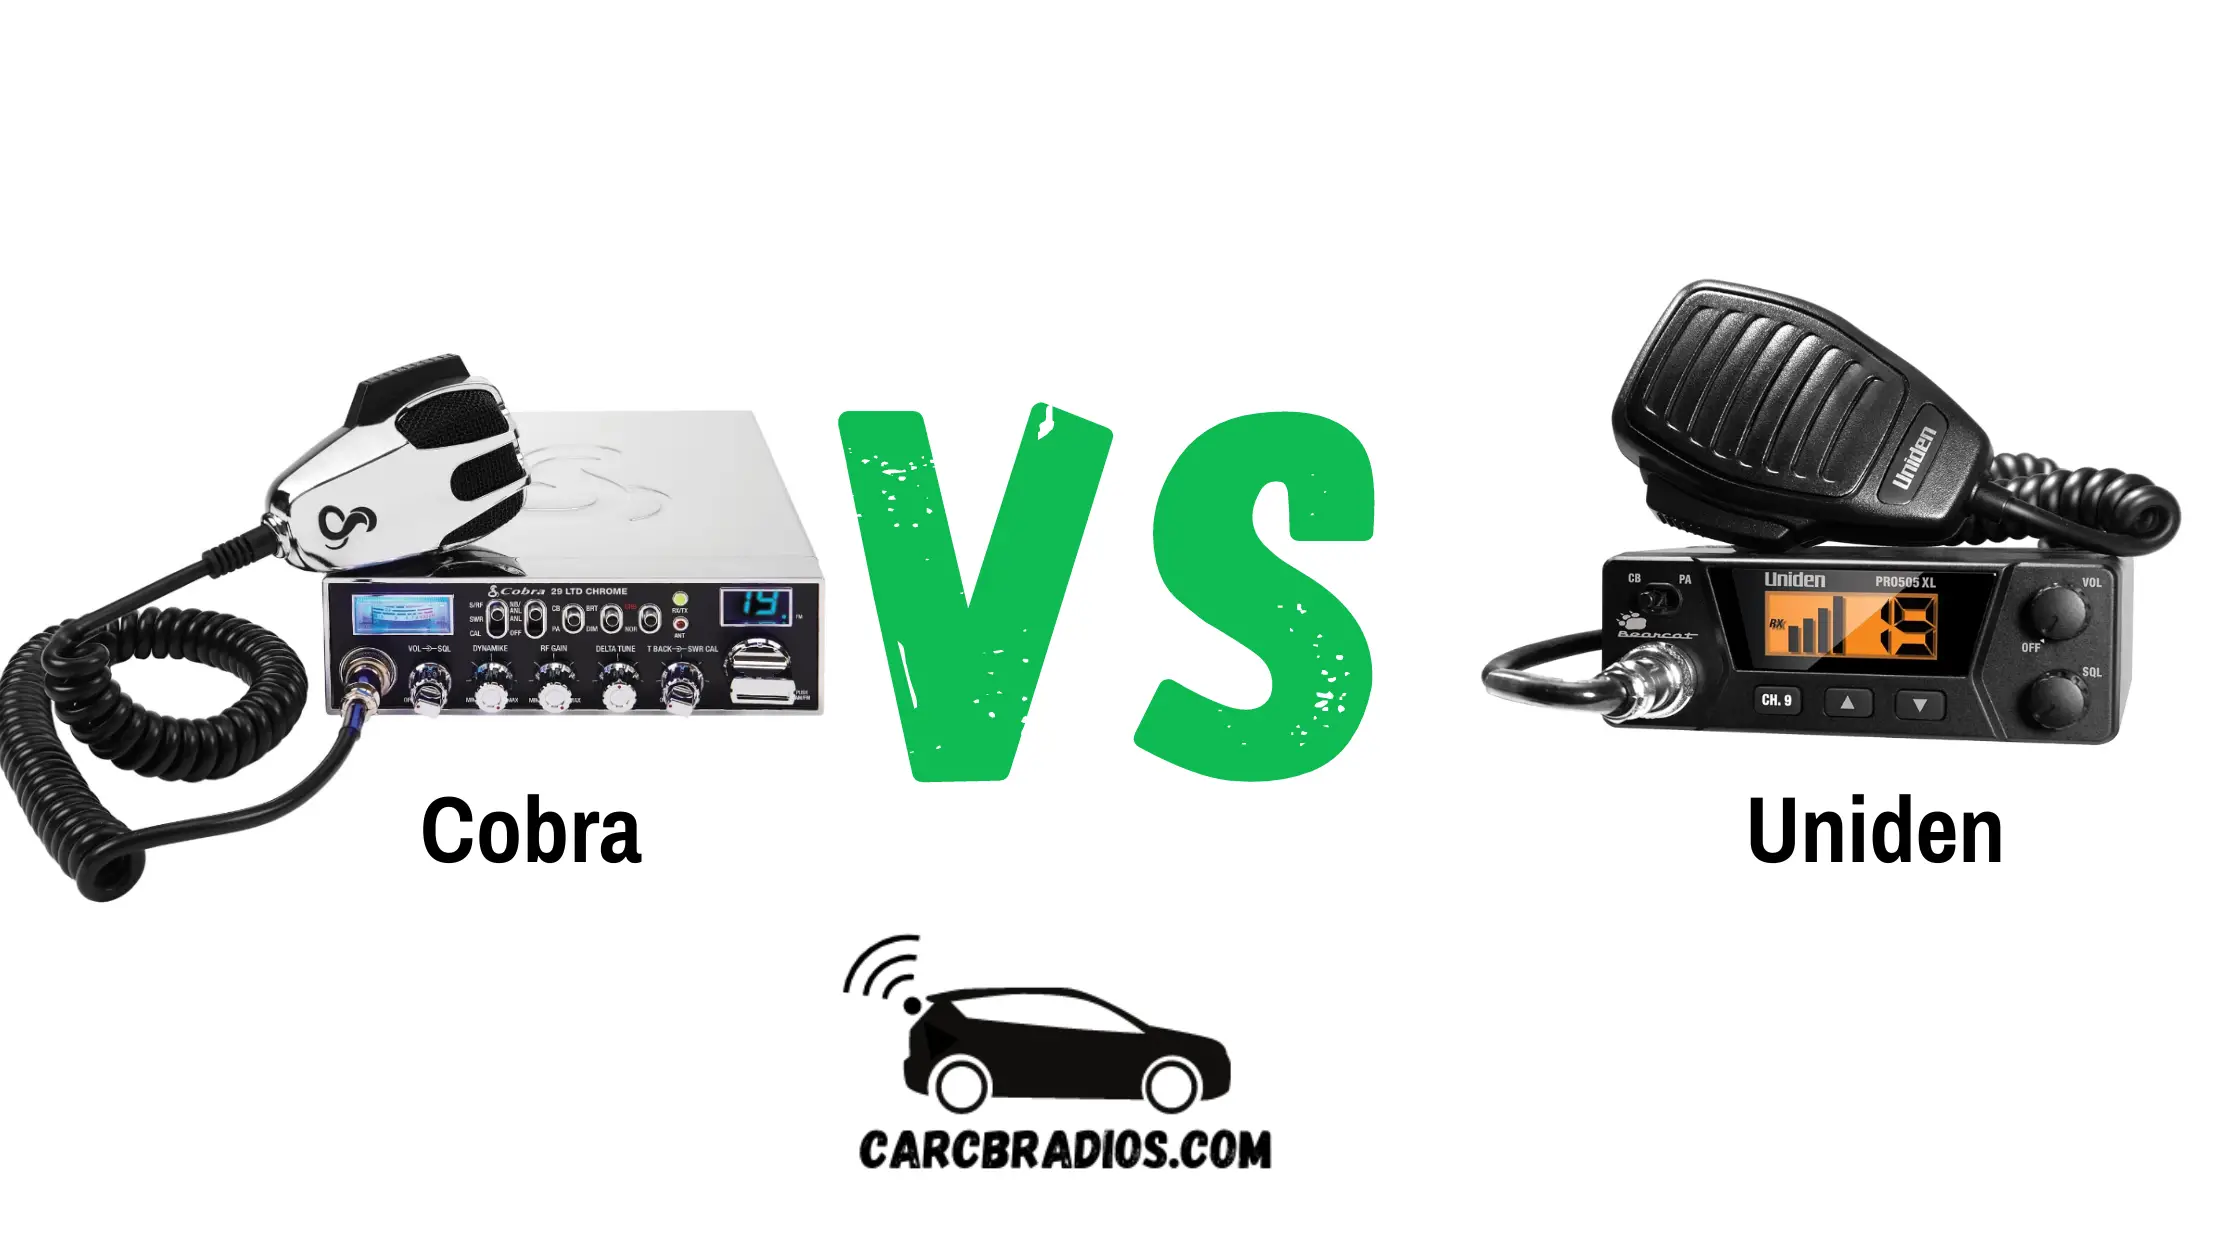 Cobra is a well-known brand in the world of two-way radios, offering a range of models for different purposes and budgets. Their radios are known for their durability and long battery life, making them a popular choice for outdoor enthusiasts and professionals alike. On the other hand, Uniden is another popular brand that offers a range of radios with advanced features such as GPS, weather alerts, and even Bluetooth connectivity.